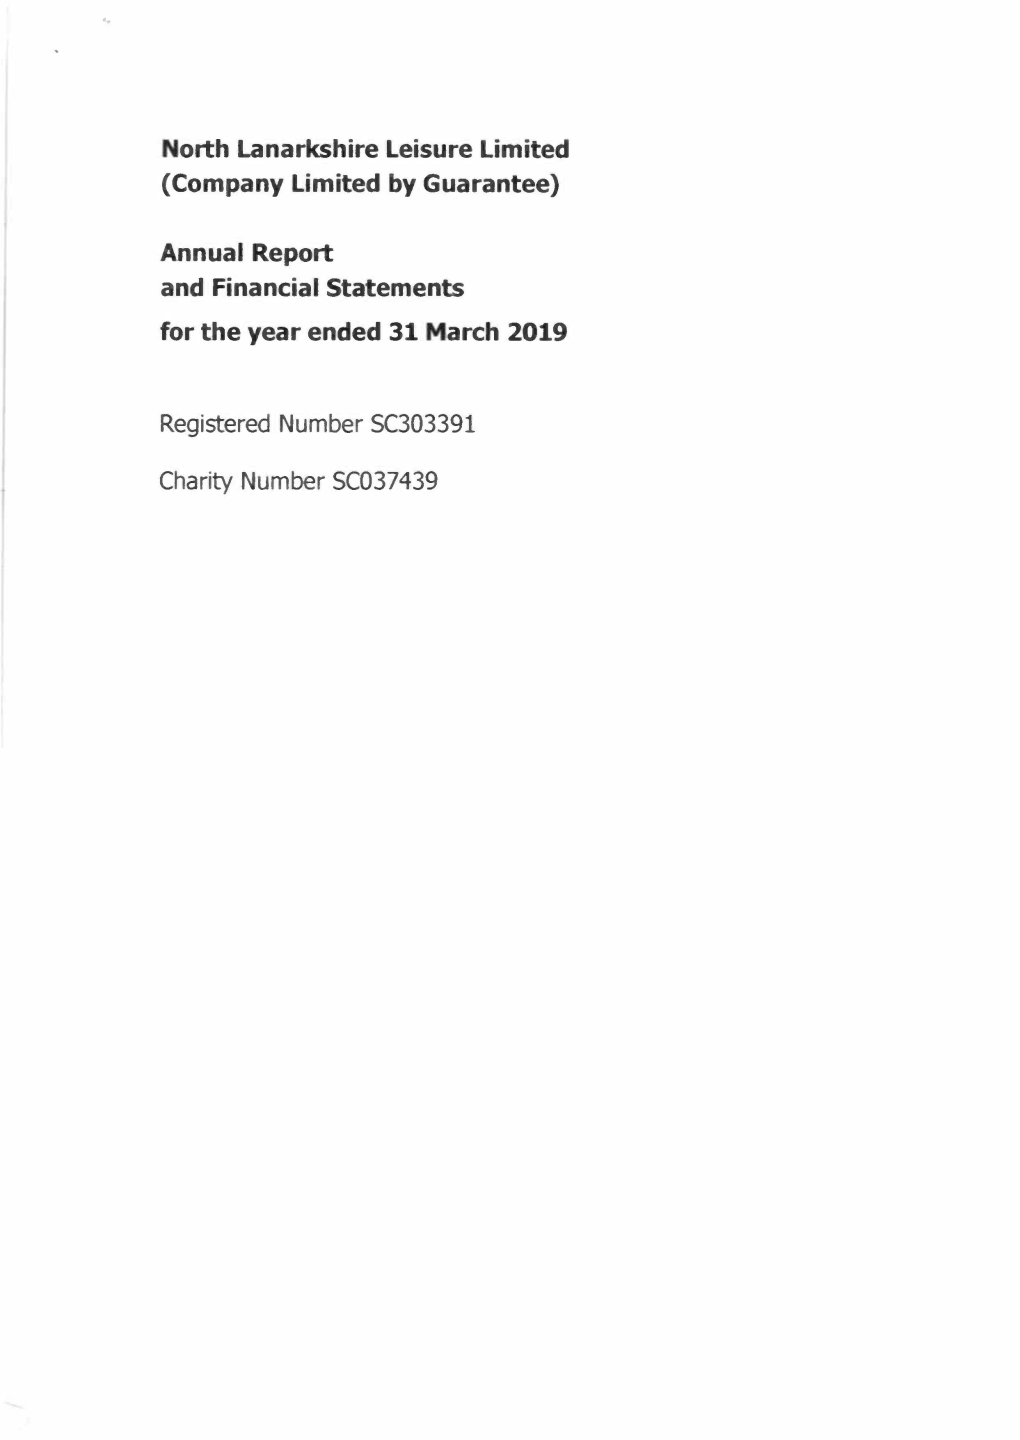 Annual Report and Financial Statements for the Year Ended 31 March 2019